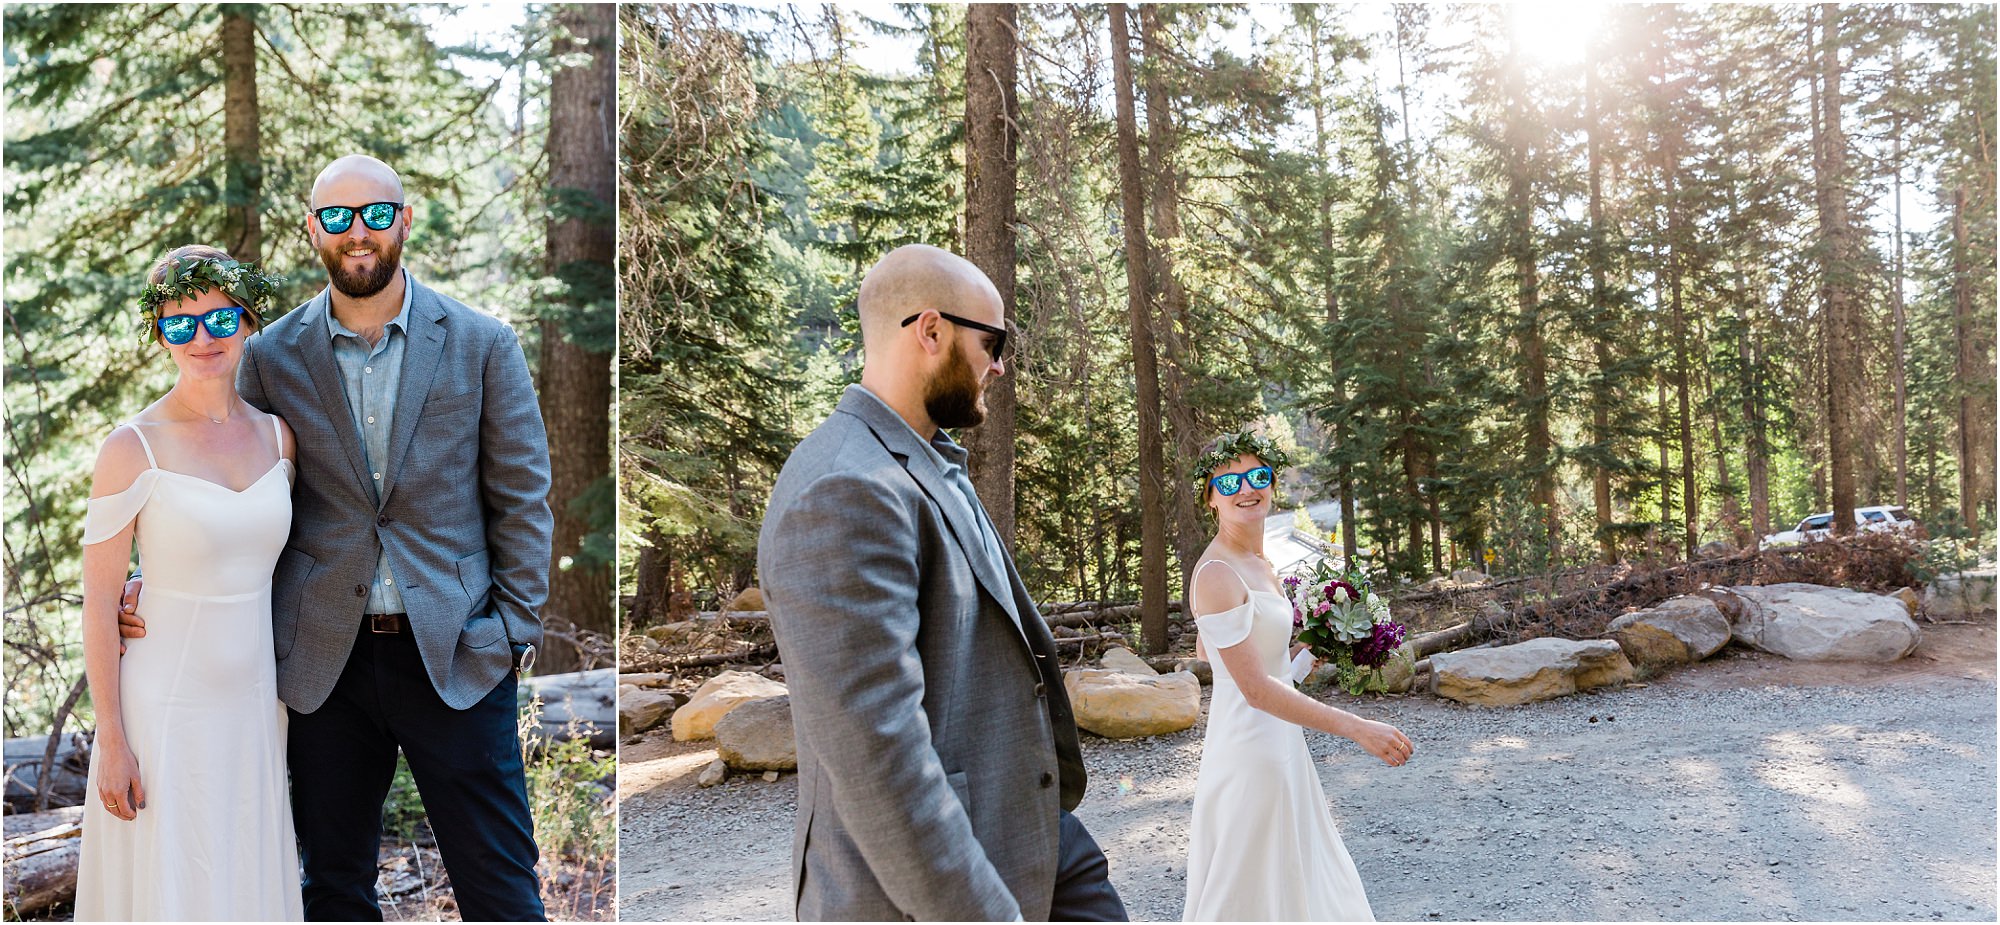 A bride and groom wear fun reflective sunglasses as they walk around the parking lot of Tumalo Falls during their Bend Oregon elopement. | Erica Swantek Photography